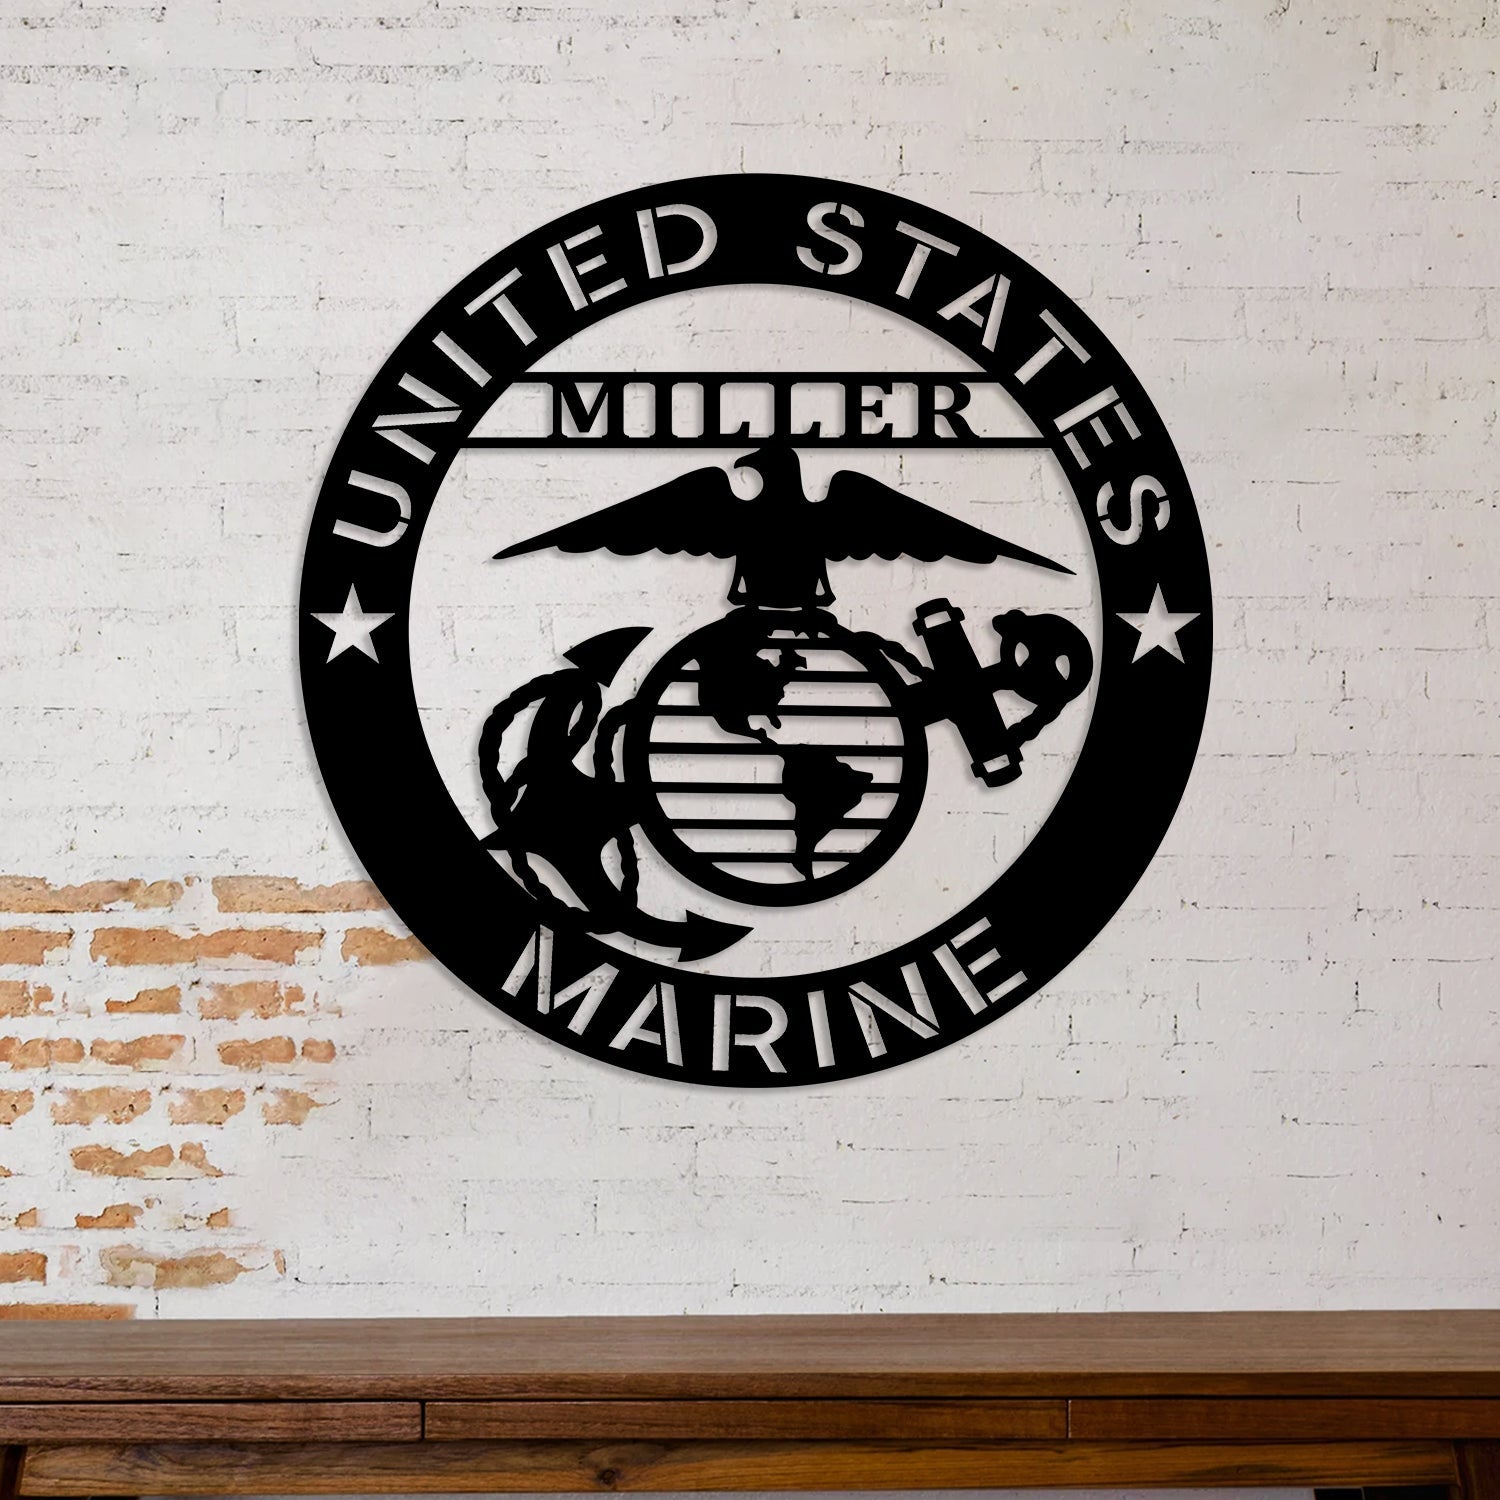 Personalized Name Us Marine Veteran Metal Sign, Wall Decor, Veterans Day Gift